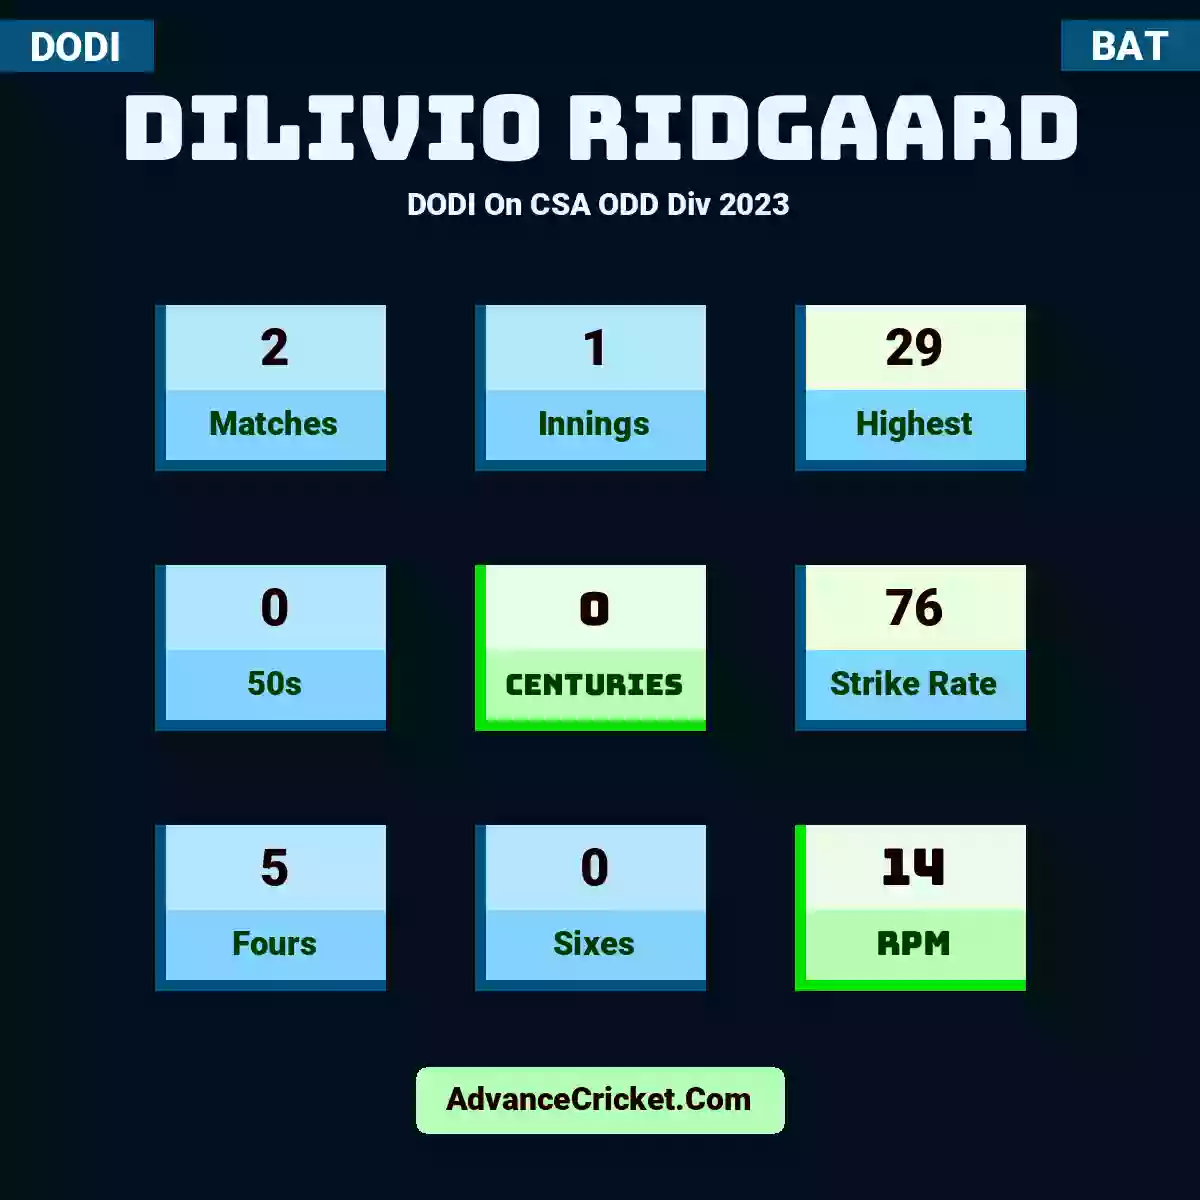 Dilivio Ridgaard DODI  On CSA ODD Div 2023, Dilivio Ridgaard played 2 matches, scored 29 runs as highest, 0 half-centuries, and 0 centuries, with a strike rate of 76. D.Ridgaard hit 5 fours and 0 sixes, with an RPM of 14.